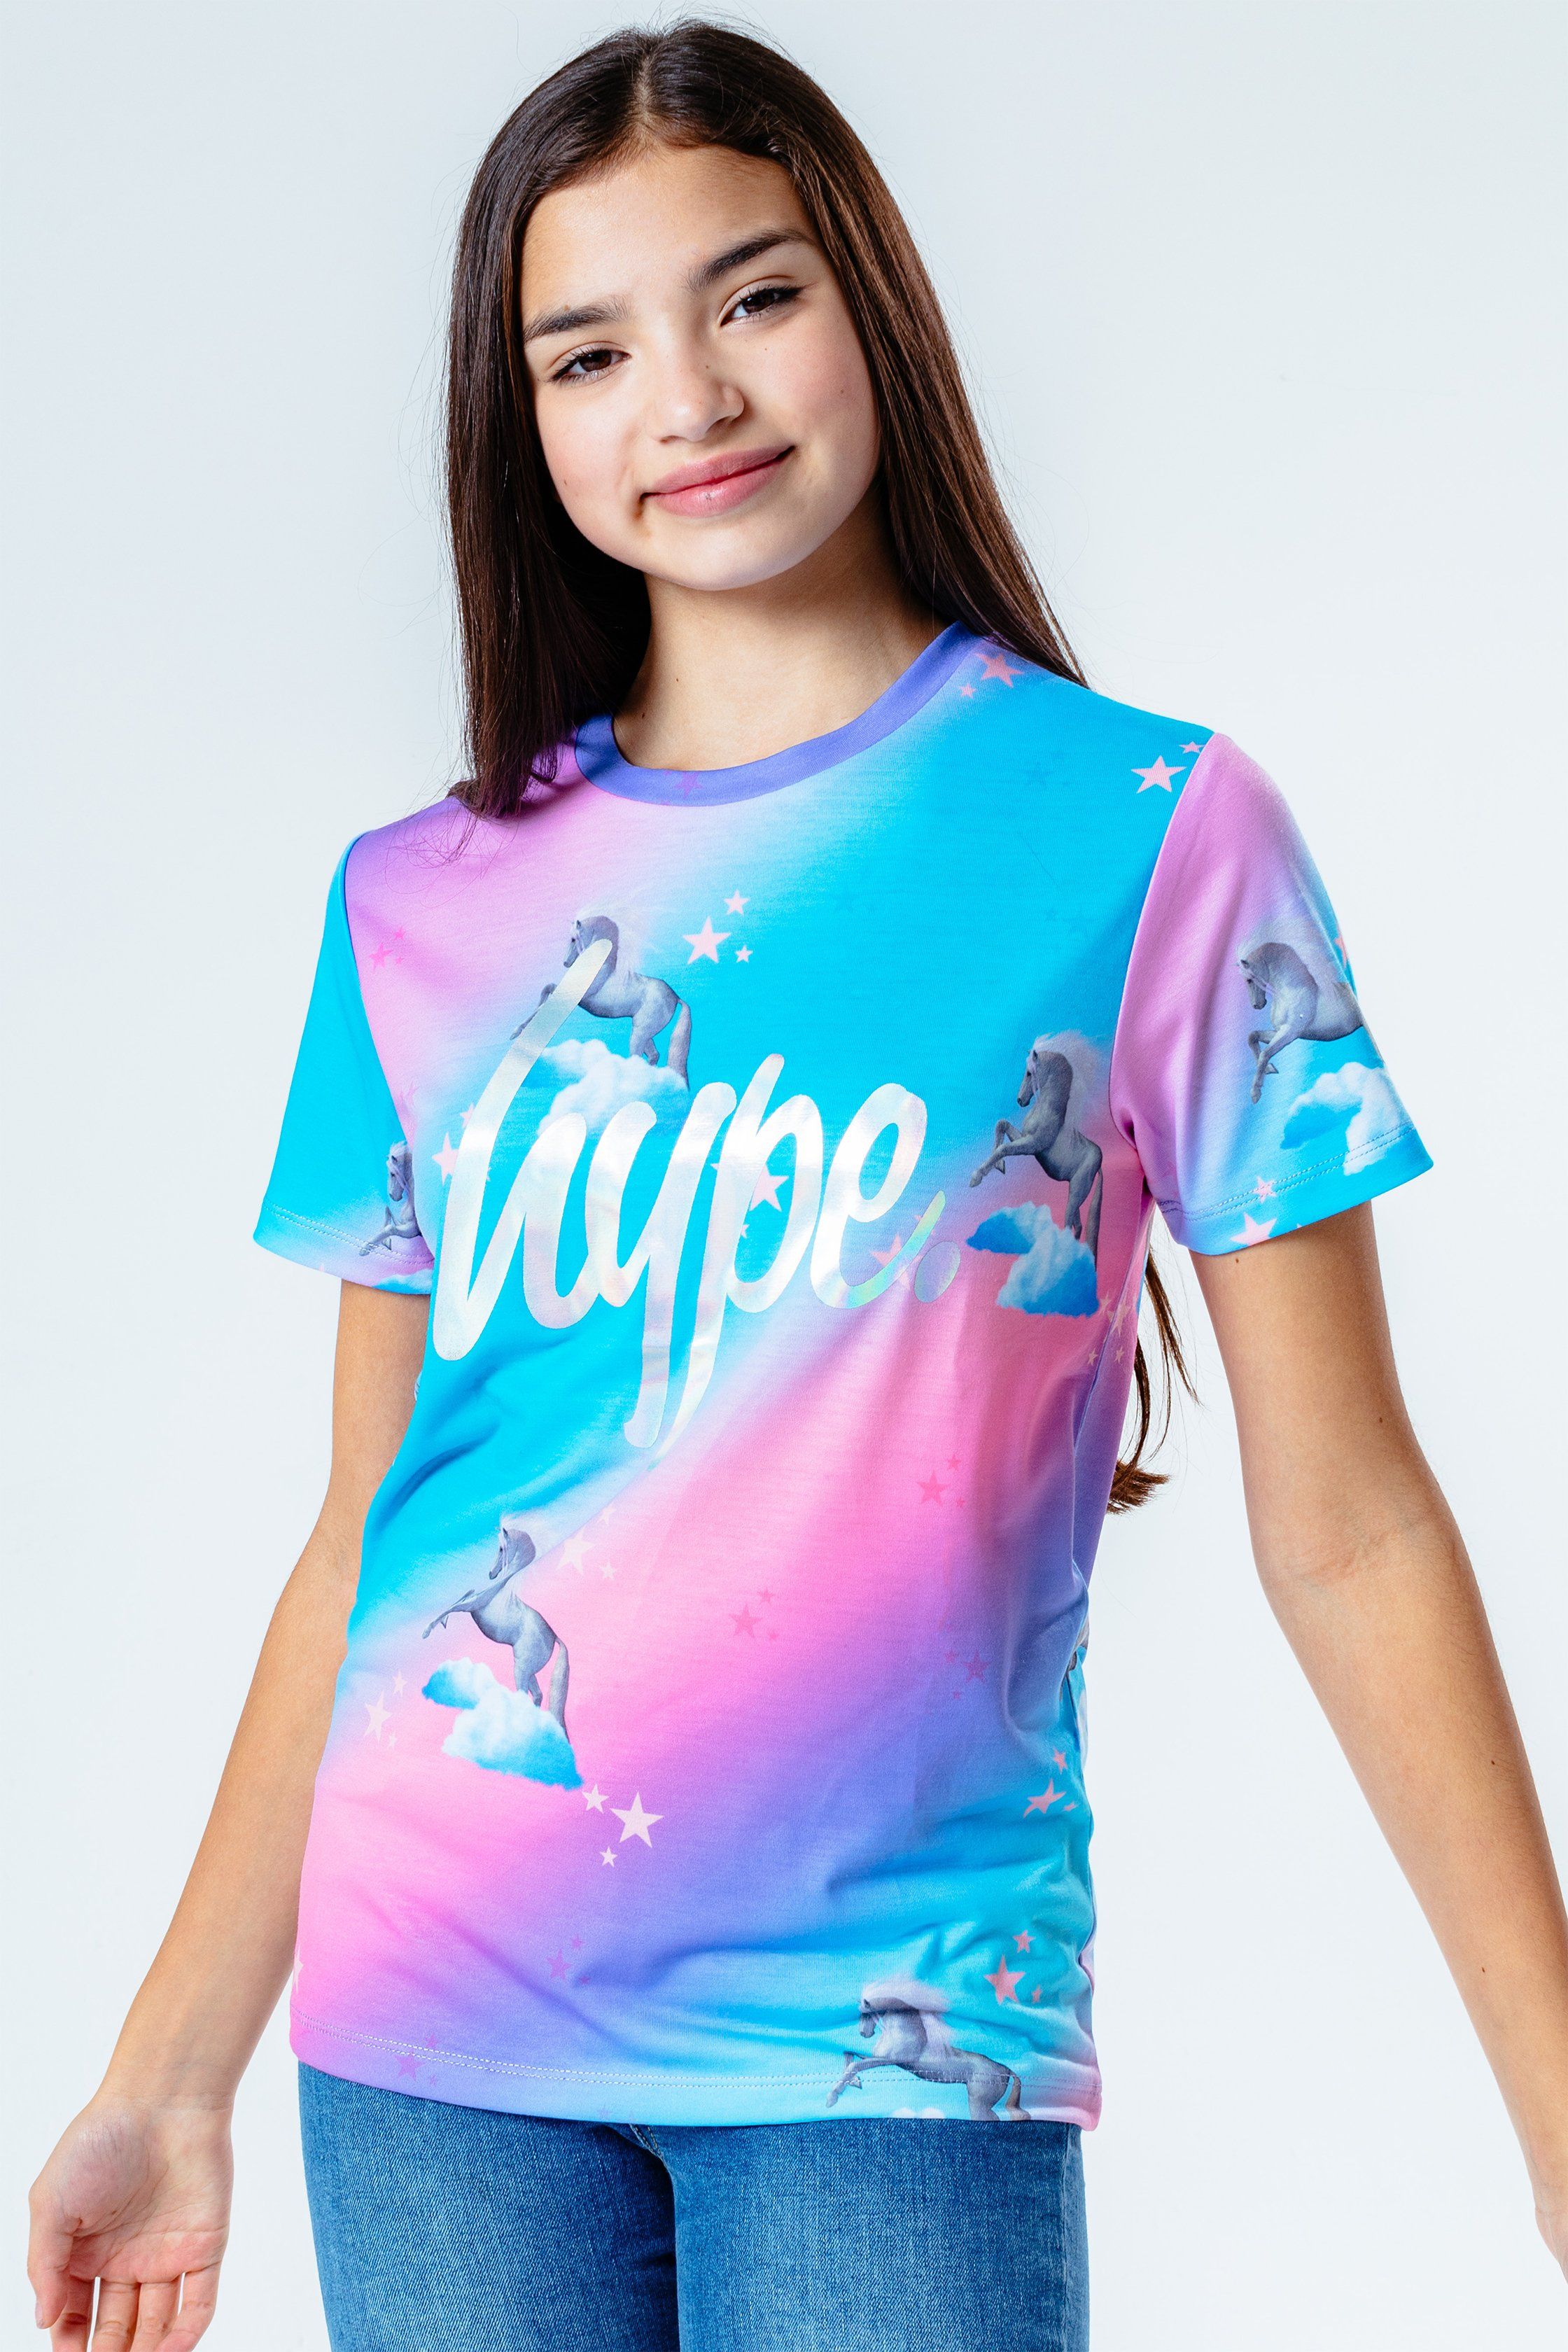 The HYPE. Unicorn Fade Kids T-Shirt is your new go-to tee. Designed in a 95% poly and 5% elastane fabric base for supreme comfort in our standard kids t-shirt shape, highlighting a crew neck line and short sleeves. With the iconic HYPE. lilac script logo in a holographic transfer foil in an all-over pink, purple and blue colour palette with an all over stars and unicorn print. Wear with cycle shorts for an on-trend look. Machine wash at 30 degrees.